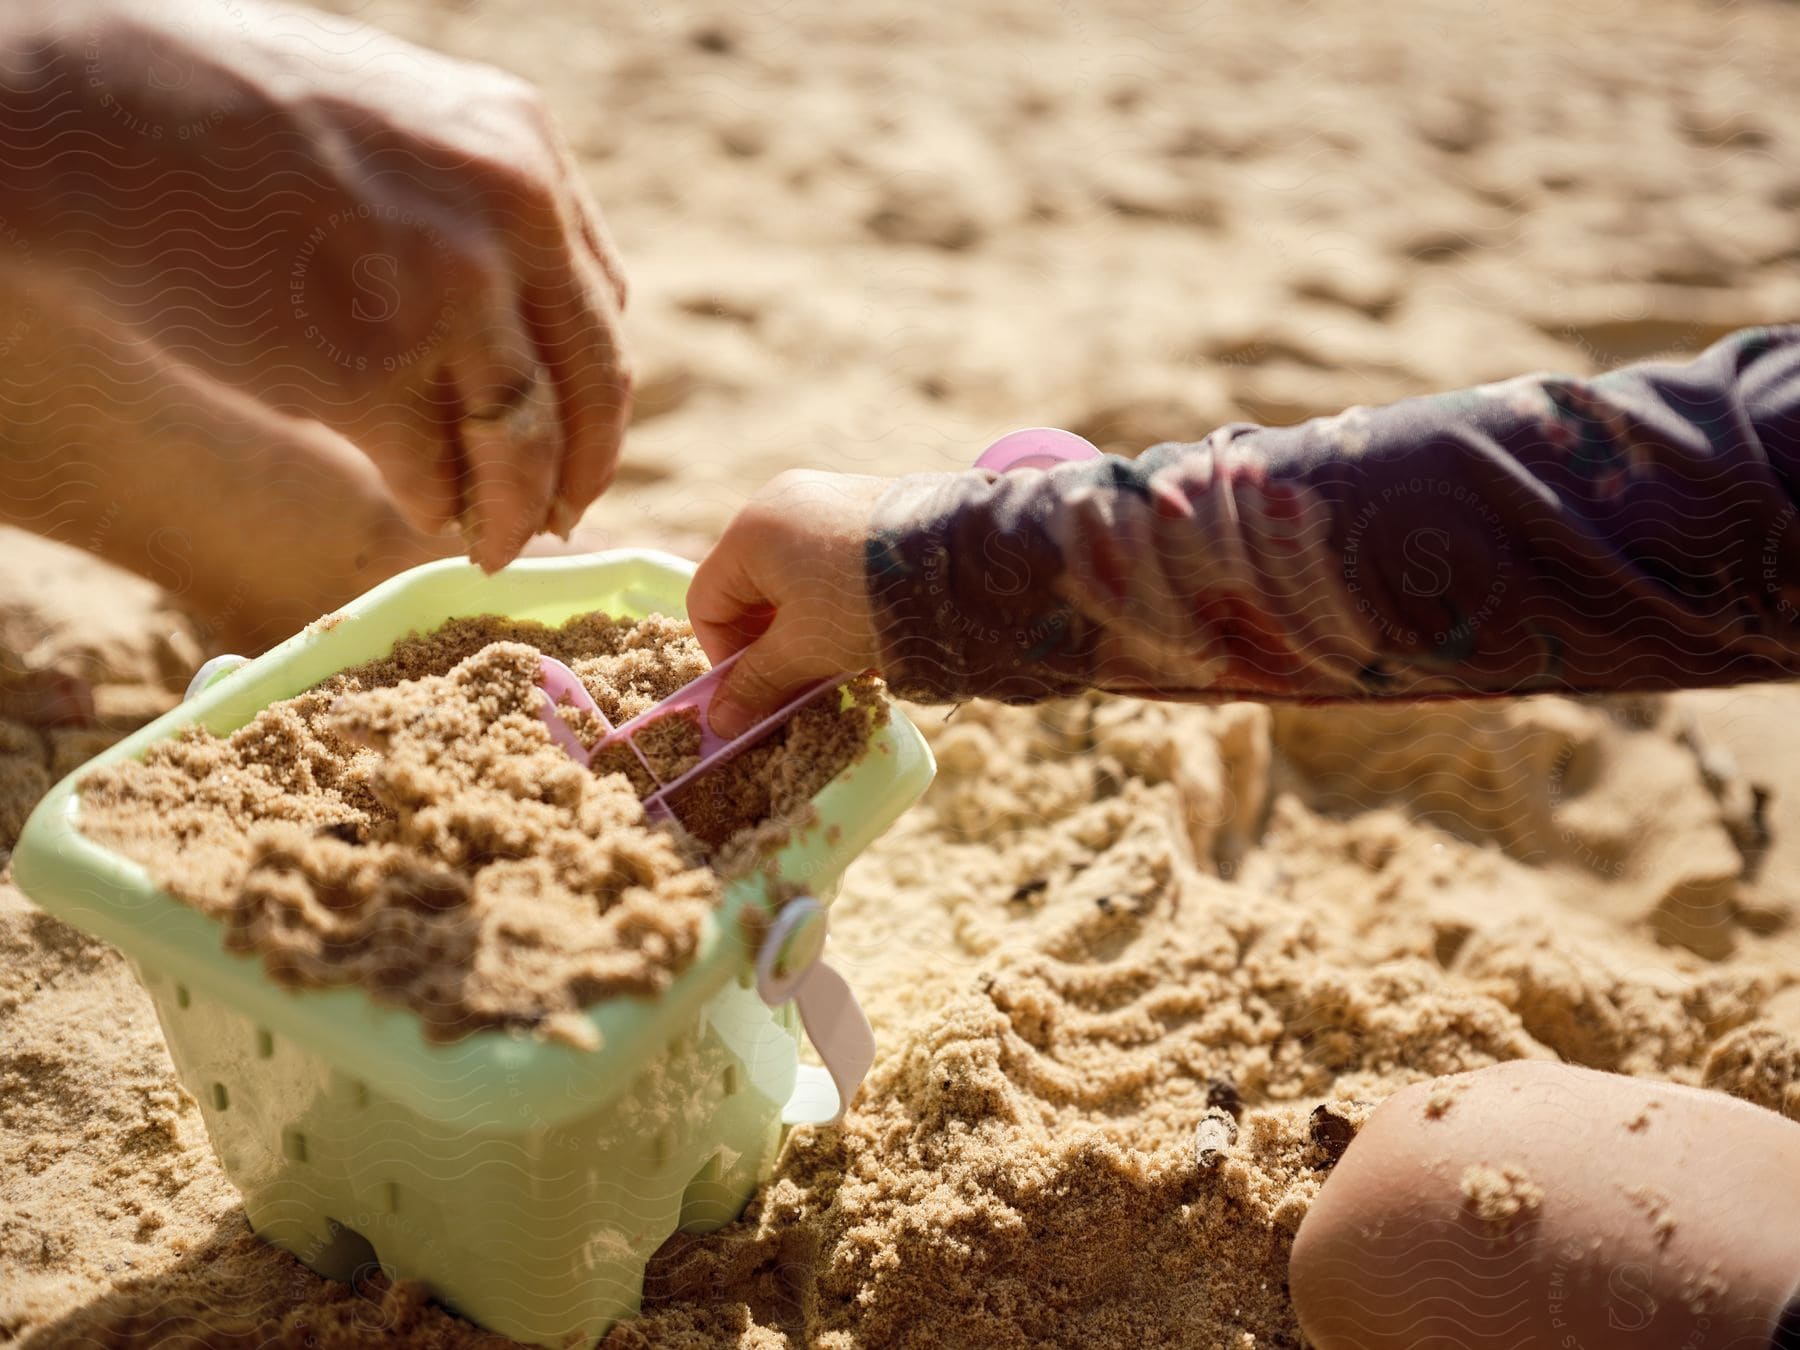 Two people are filling a small green bucket with sand using purple shovels.